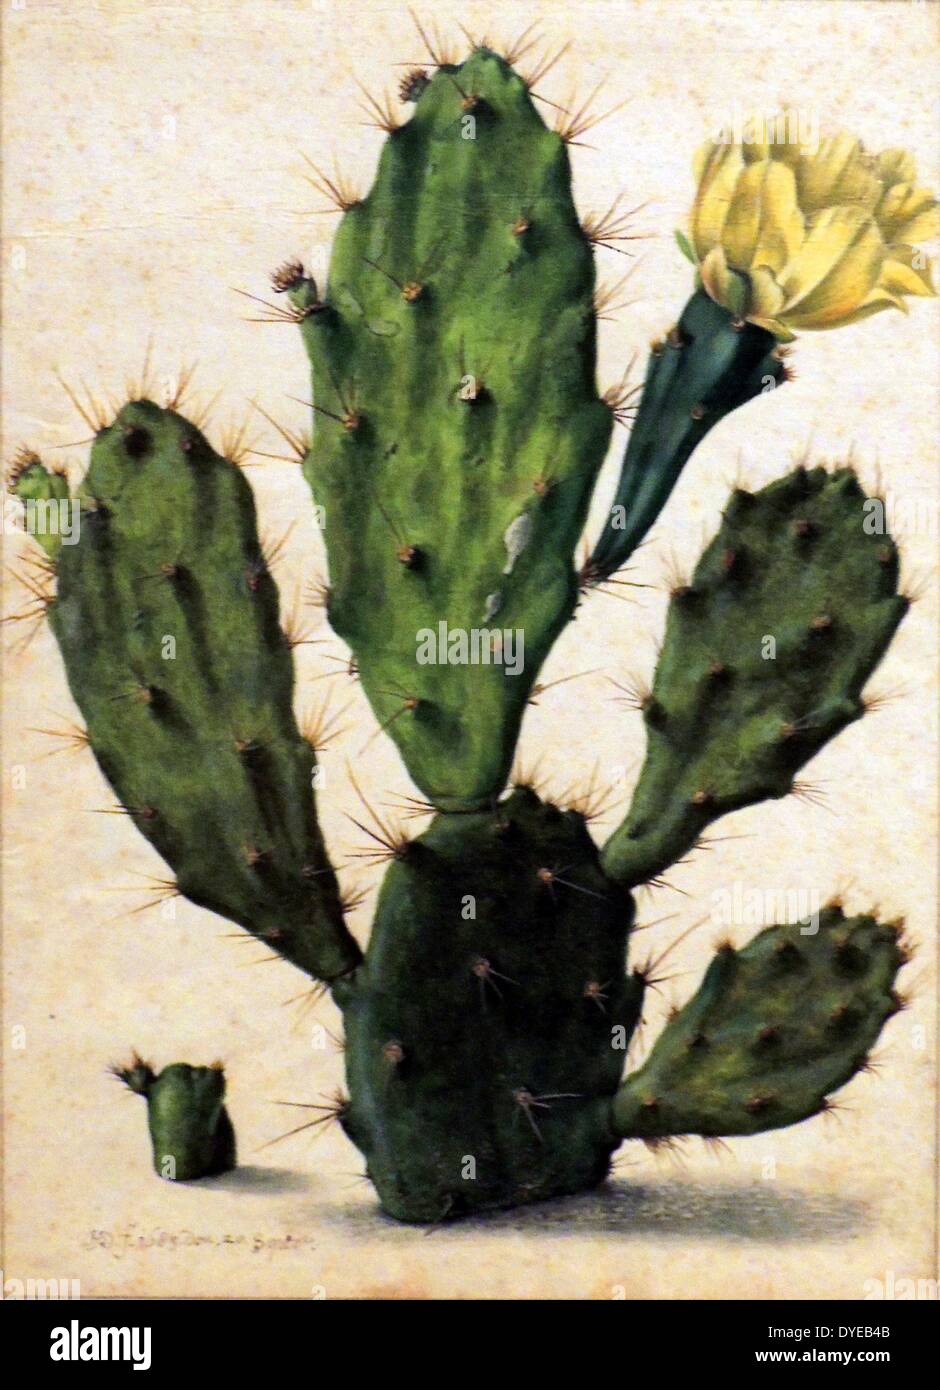 Prickly Pear in Bloom by Herman Saftleven (1609-1685) watercolour and gouache, over graphite, 1683. Herman Saftleven was a highly productive draughtsman of landscapes, city views, genre scenes and animals. Late in life, between 1680-1684, on commission for Agneta Block, he produced a magnificent series of images of the flowers in her collection. She owned Vijverhof, a country manor on the River Vecht and employed various artists to draw her flowers. Stock Photo